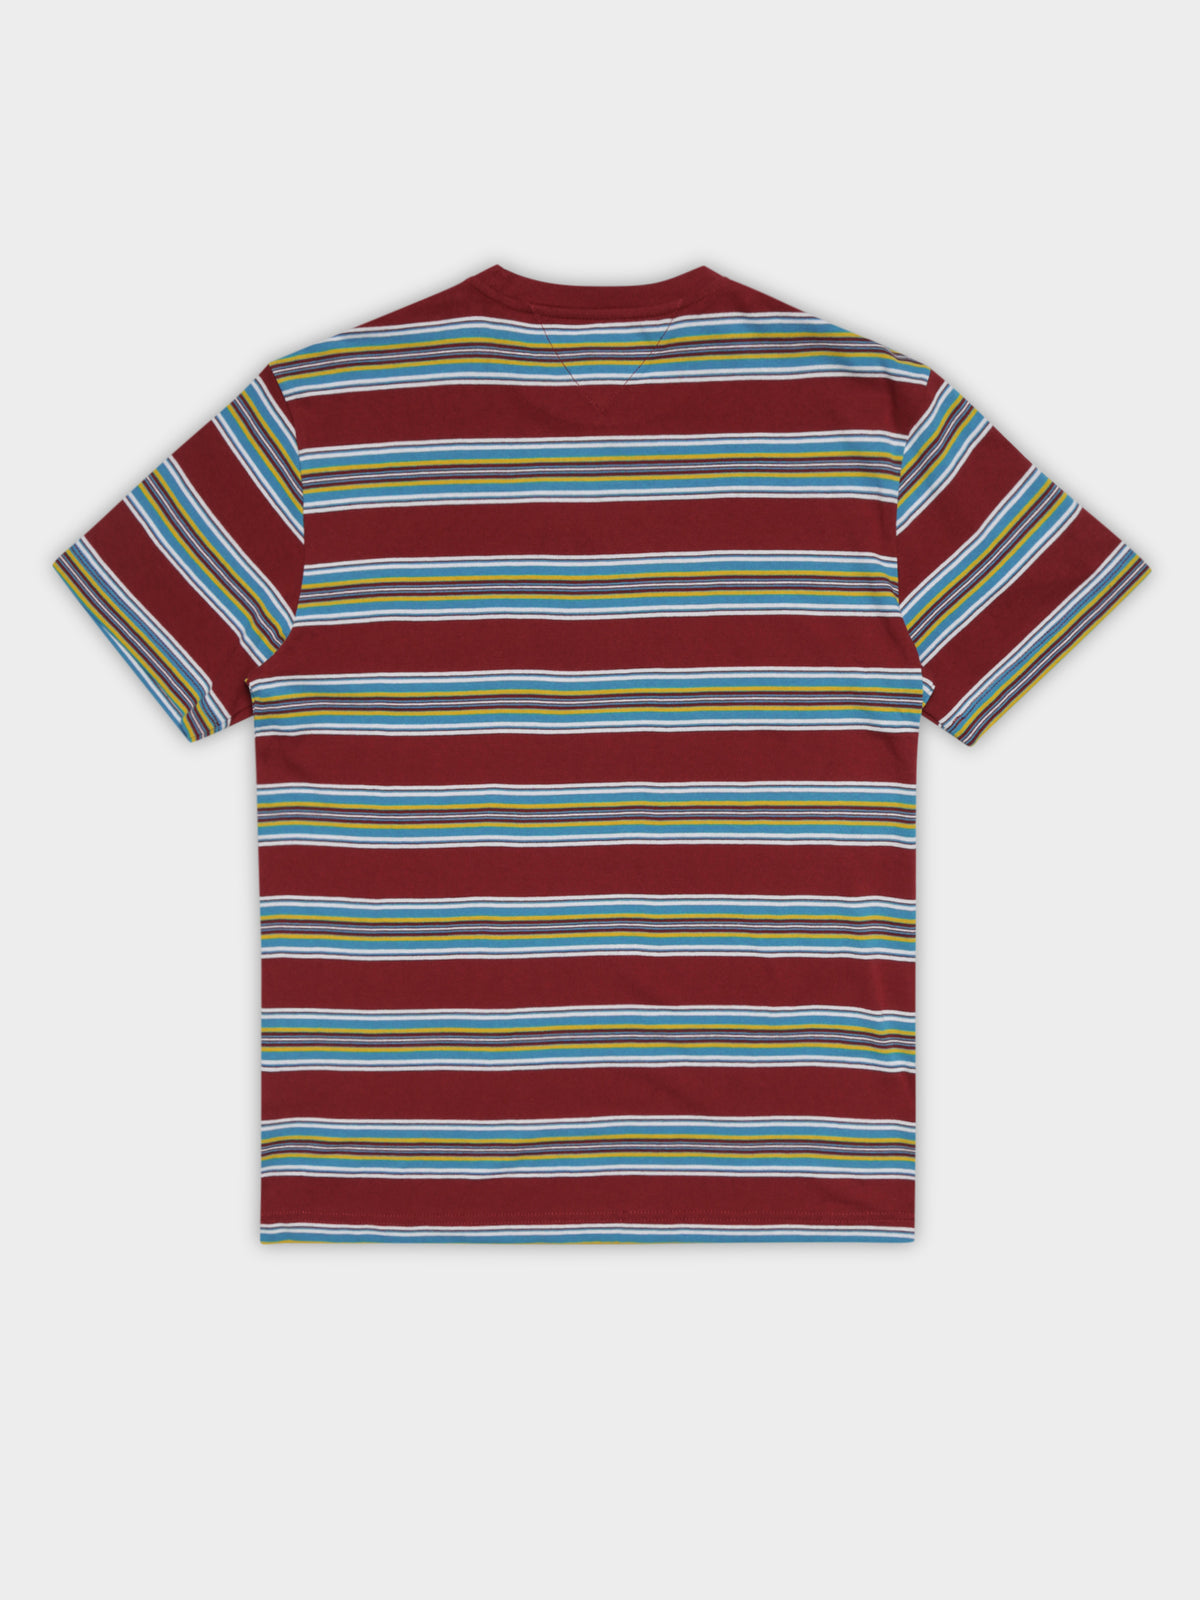 Stripe Layout T-Shirt in Wine Red